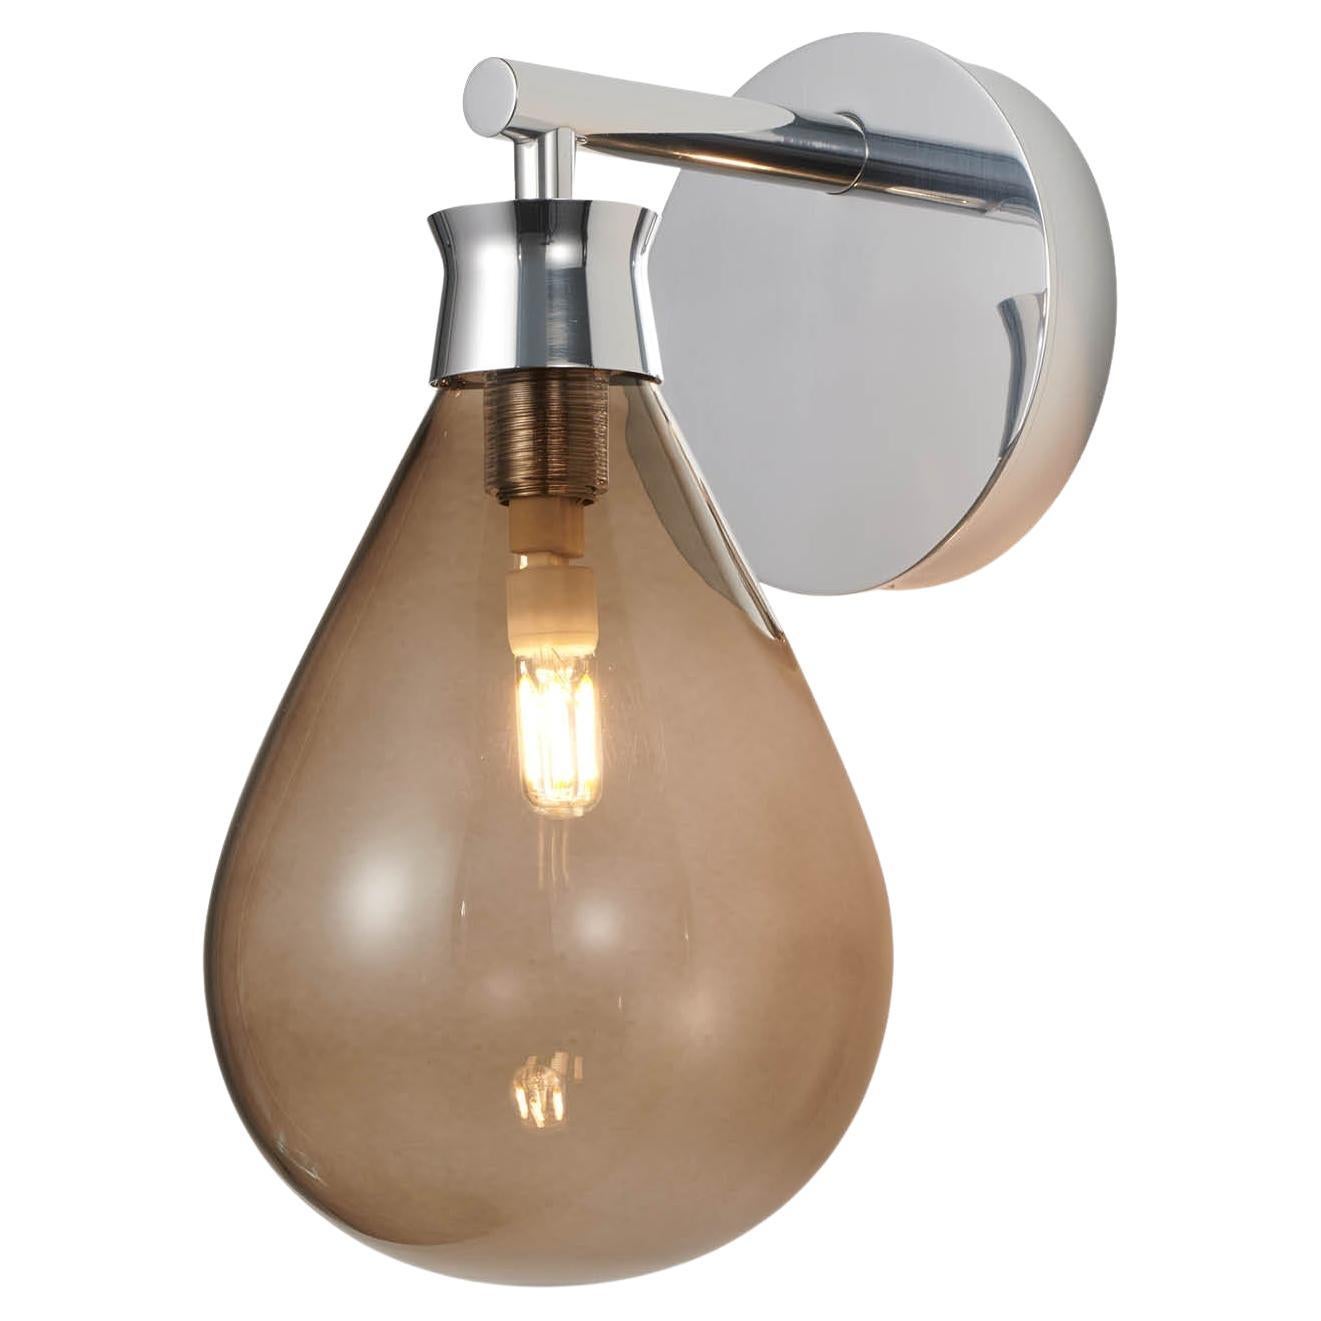 Cintola Wall Light in Polished Aluminium with Bronze Handblown Glass Globe For Sale